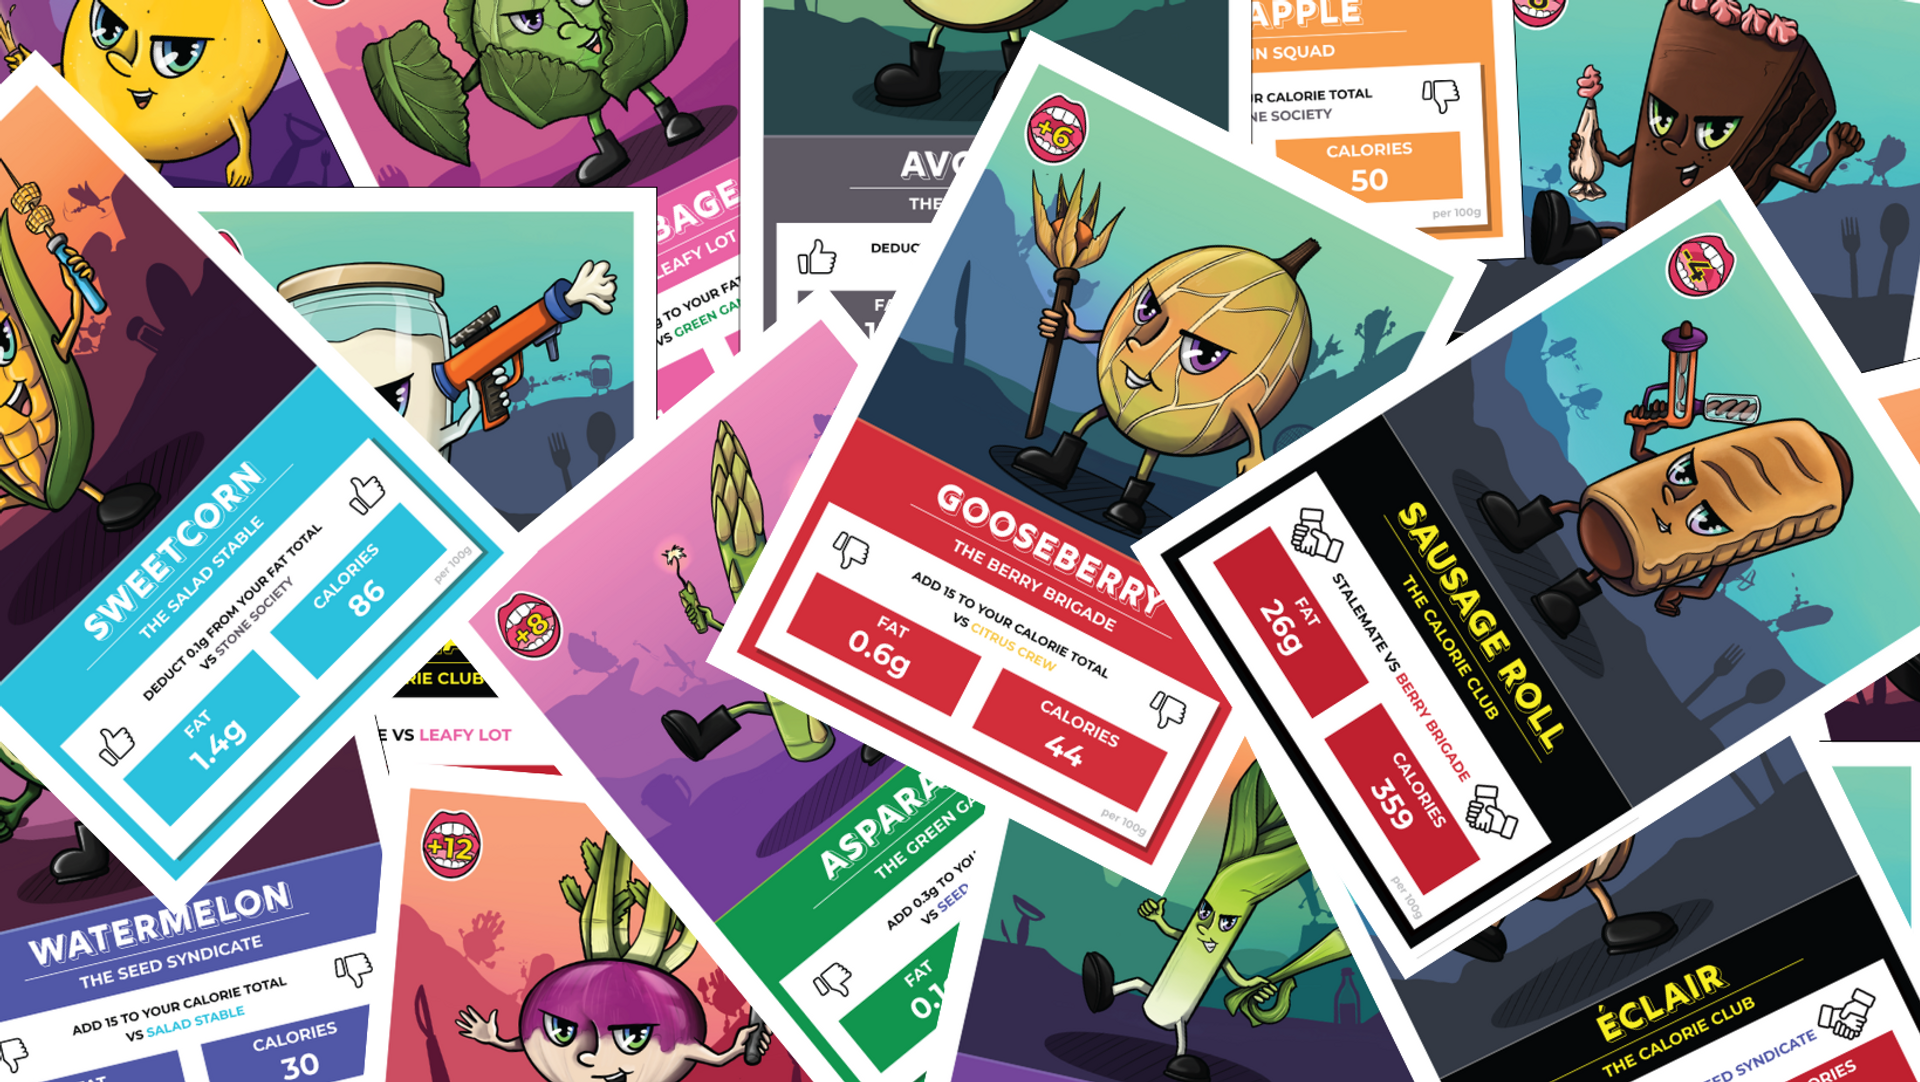 An image of cards from the Food Fight card game.